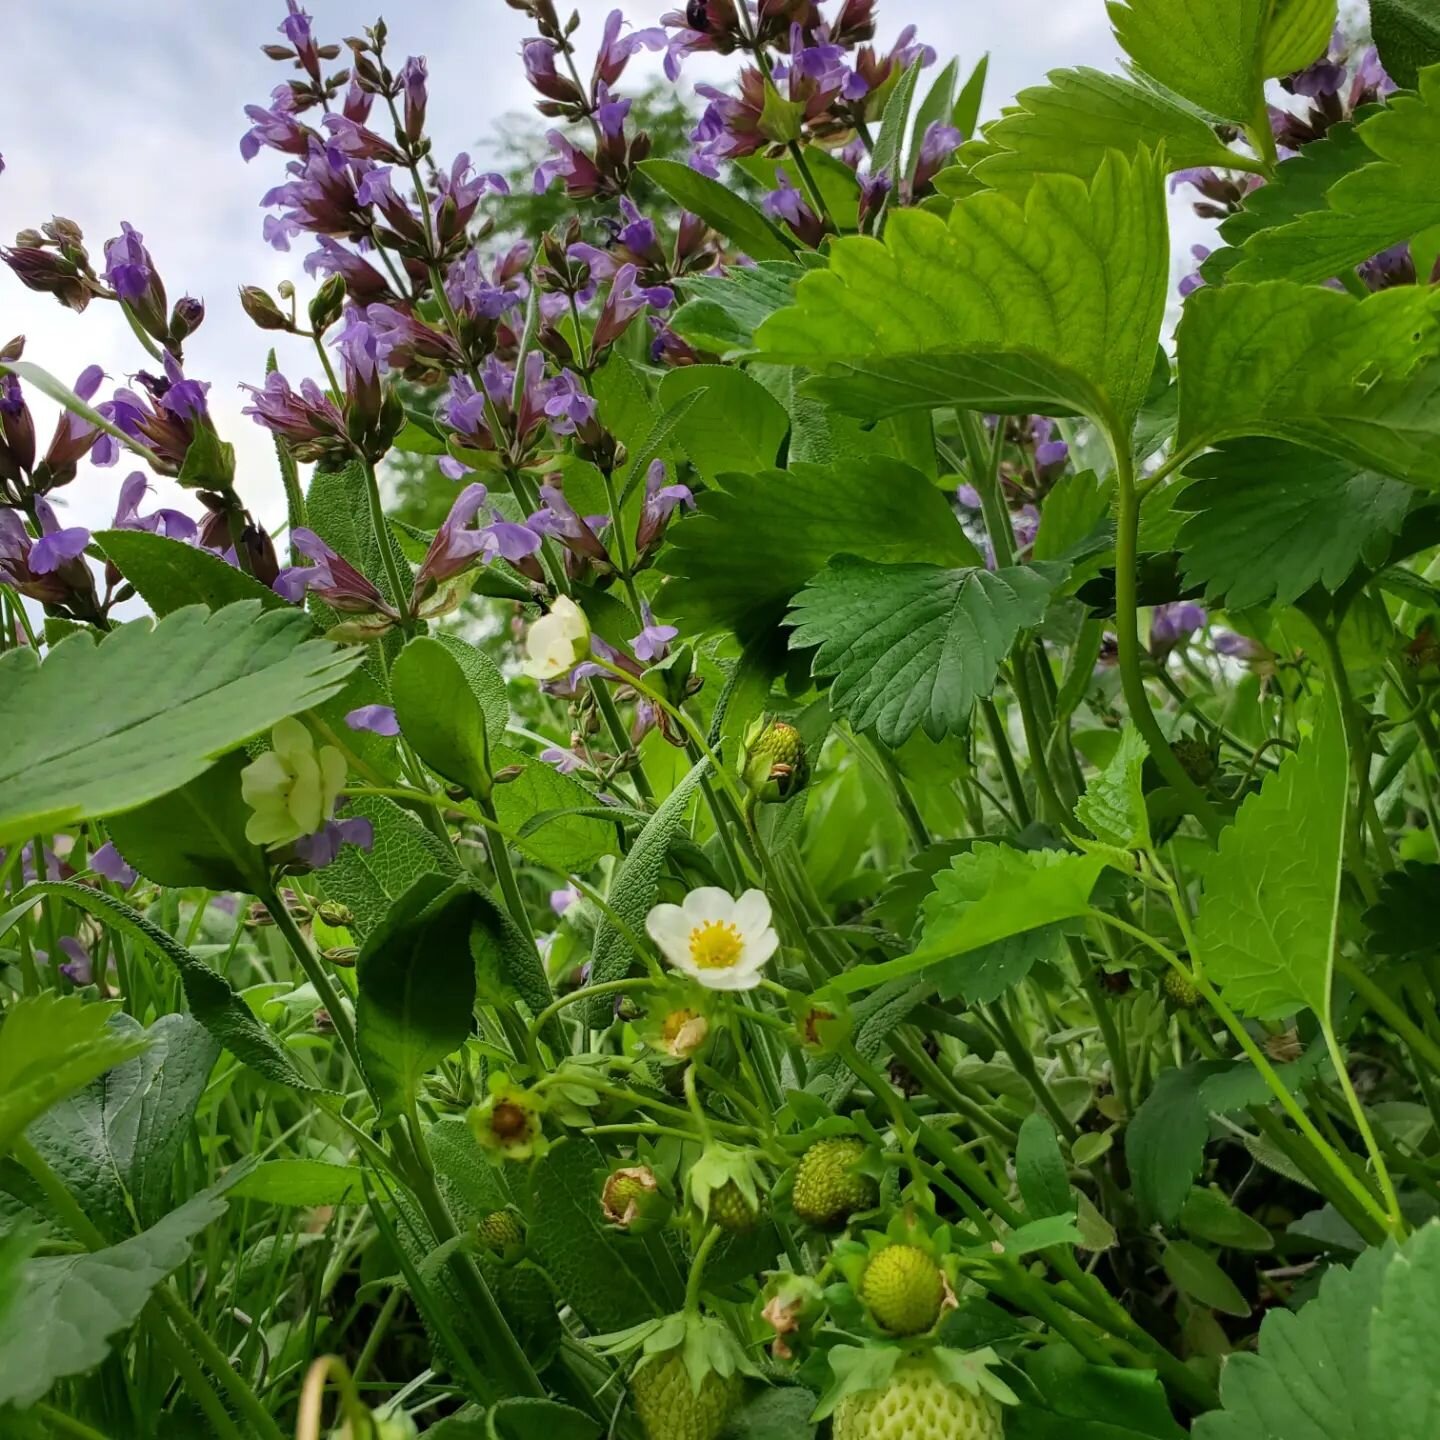 Springtime in Milwaukee. Flowering sage, flowering thyme, strawberries starting to fruit... delightful! 

2 more weekends before summer solstice!

What intentions do you have for the end of spring? What seeds do you want to plant to sprout in summer 